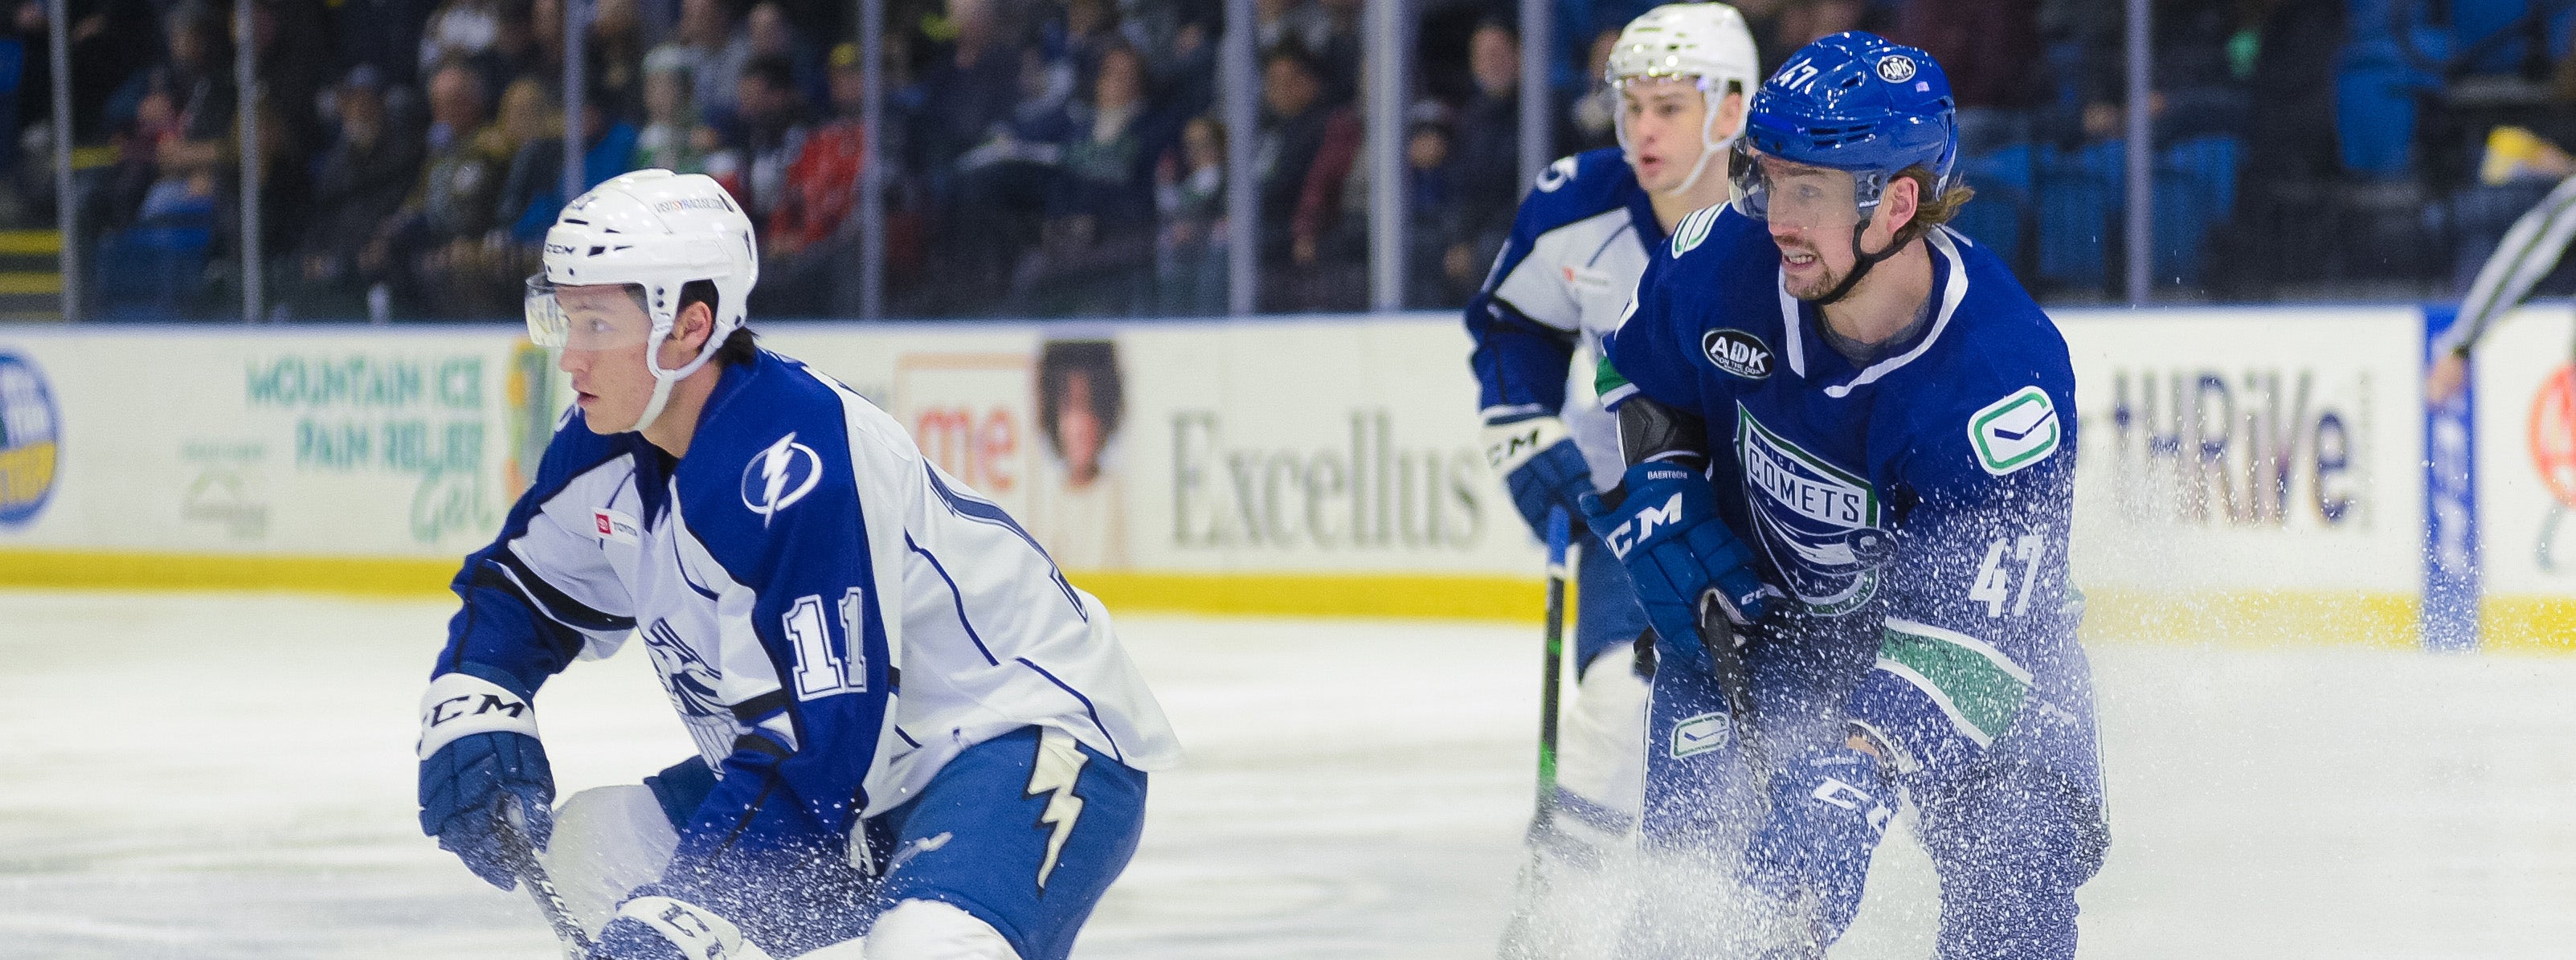 COMETS BEGIN FOUR-GAME ROAD SWING IN SYRACUSE